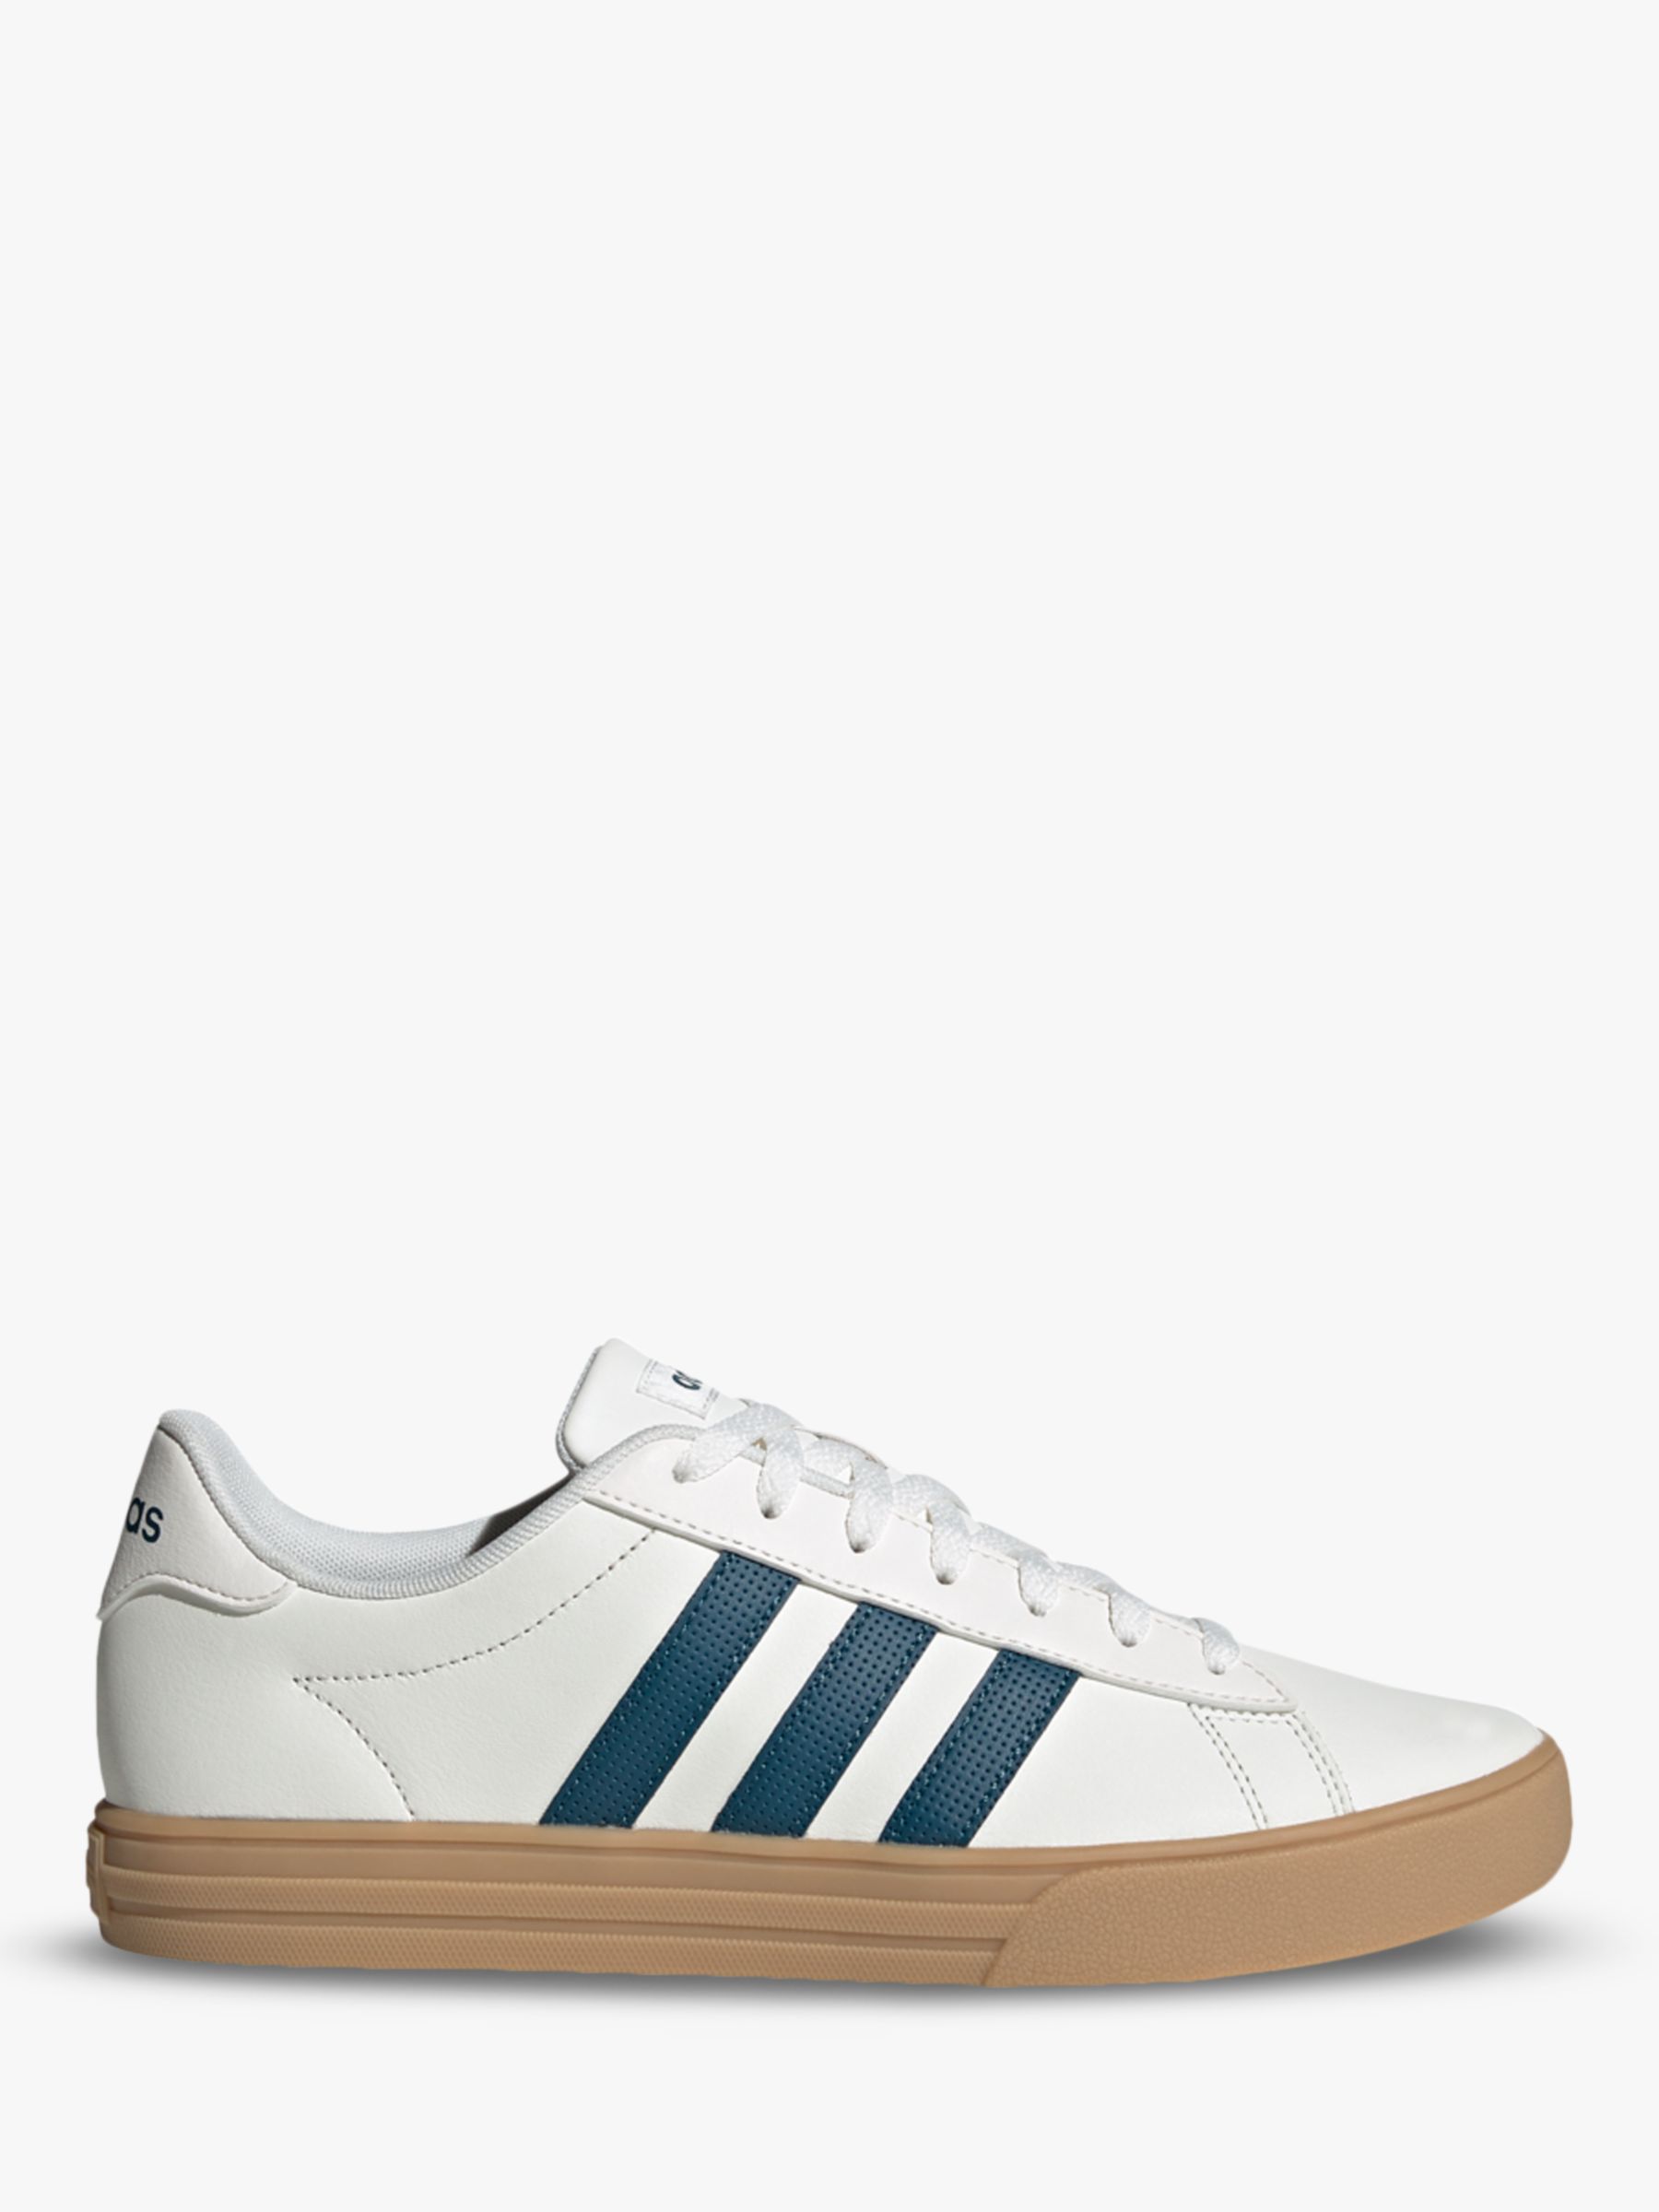 adidas daily 2.0 trainers